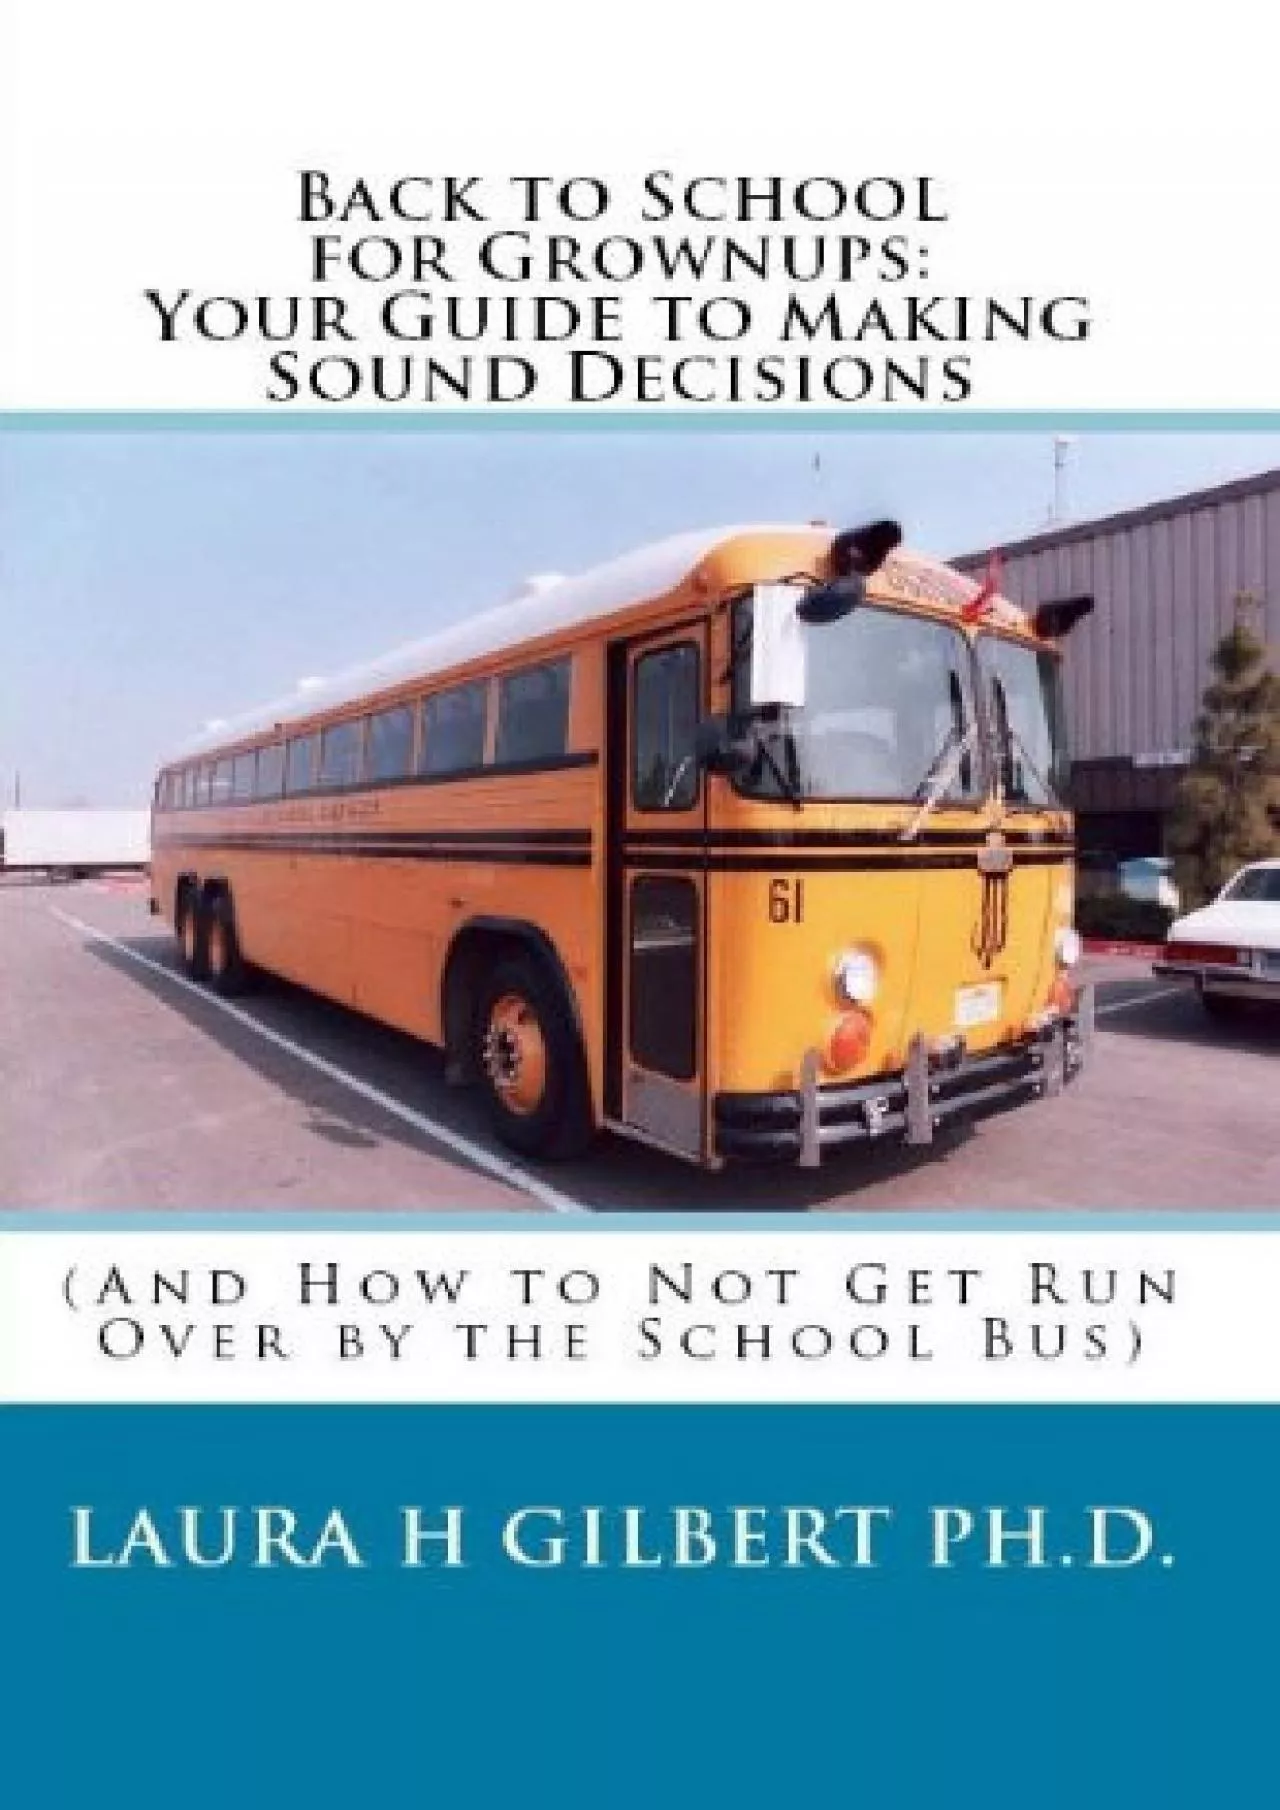 [EBOOK] Back to School for Grownups: Your Guide to Making Sound Decisions And How to Not